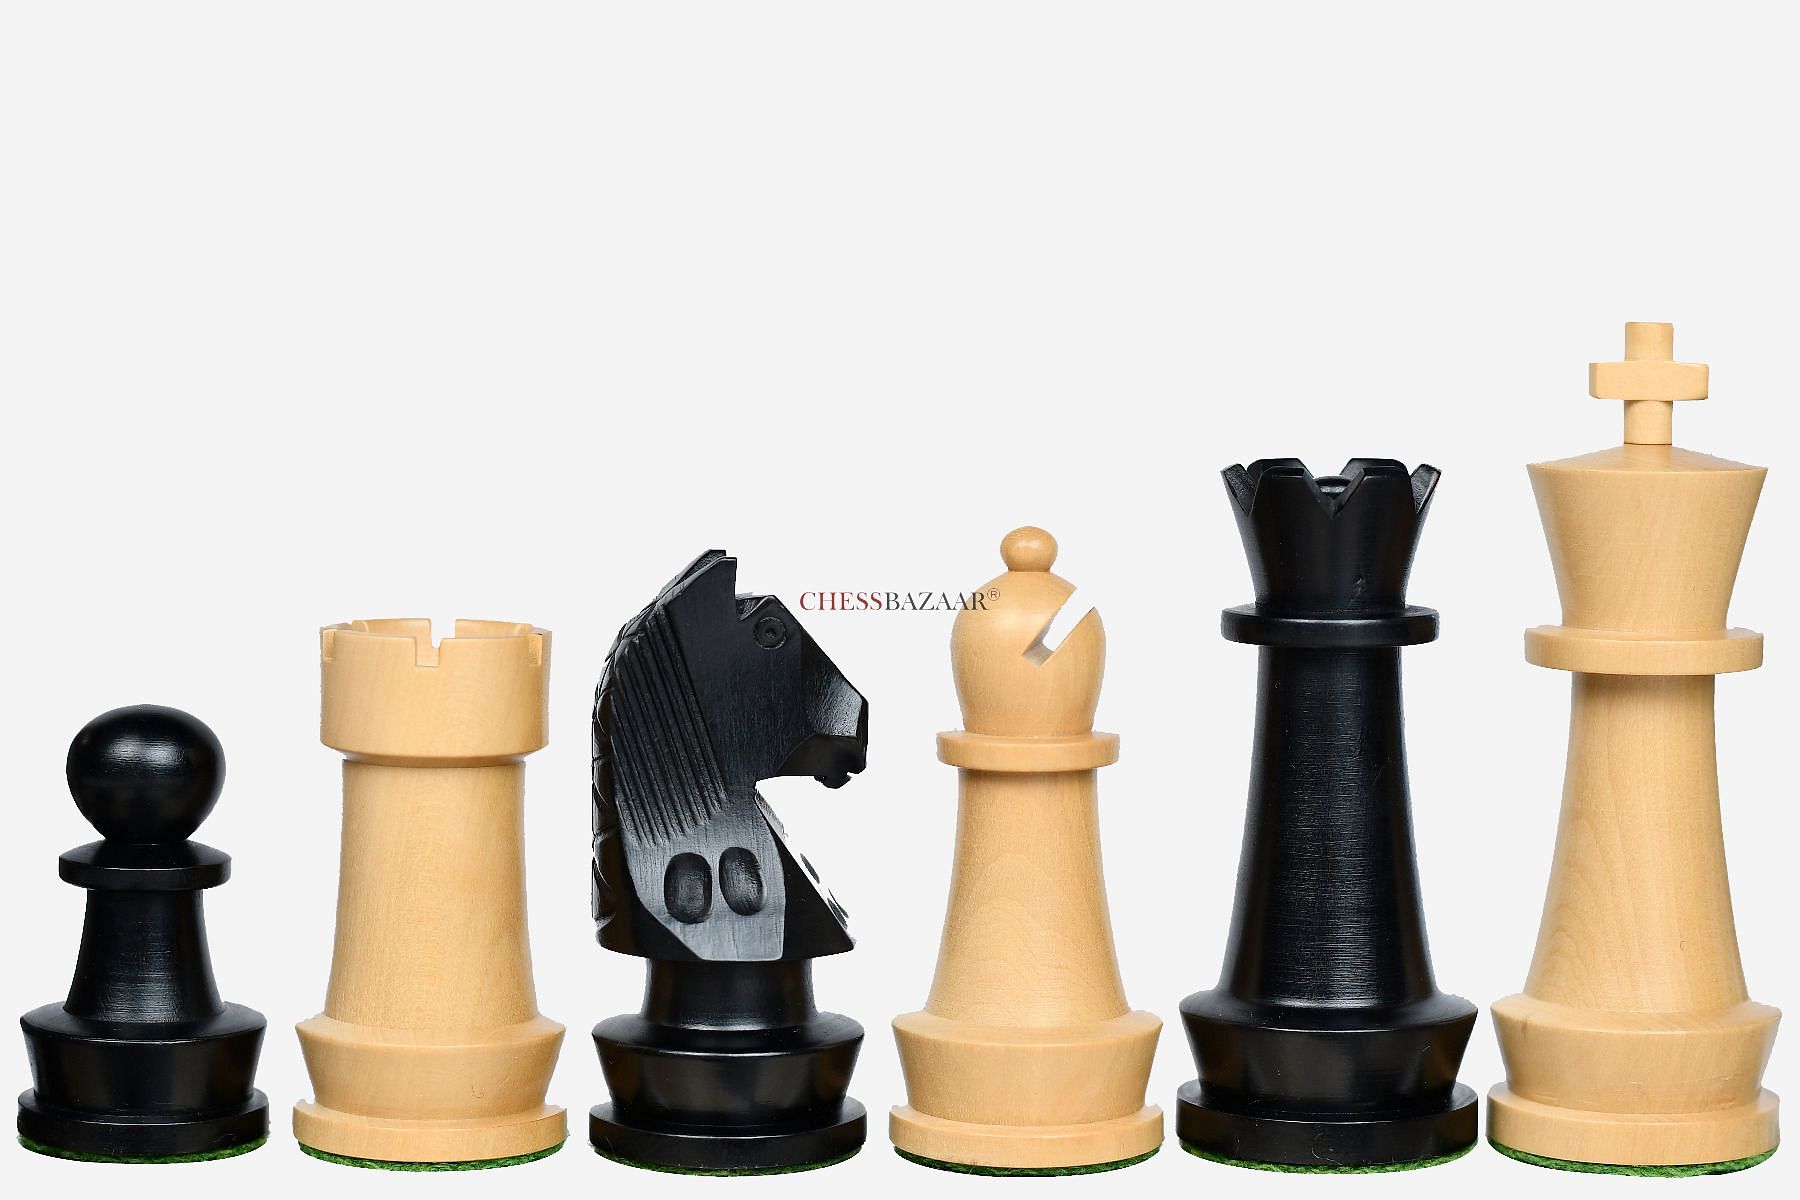 3.7 British Staunton Weighted Chess Set- Chess Pieces Only- Ebonised